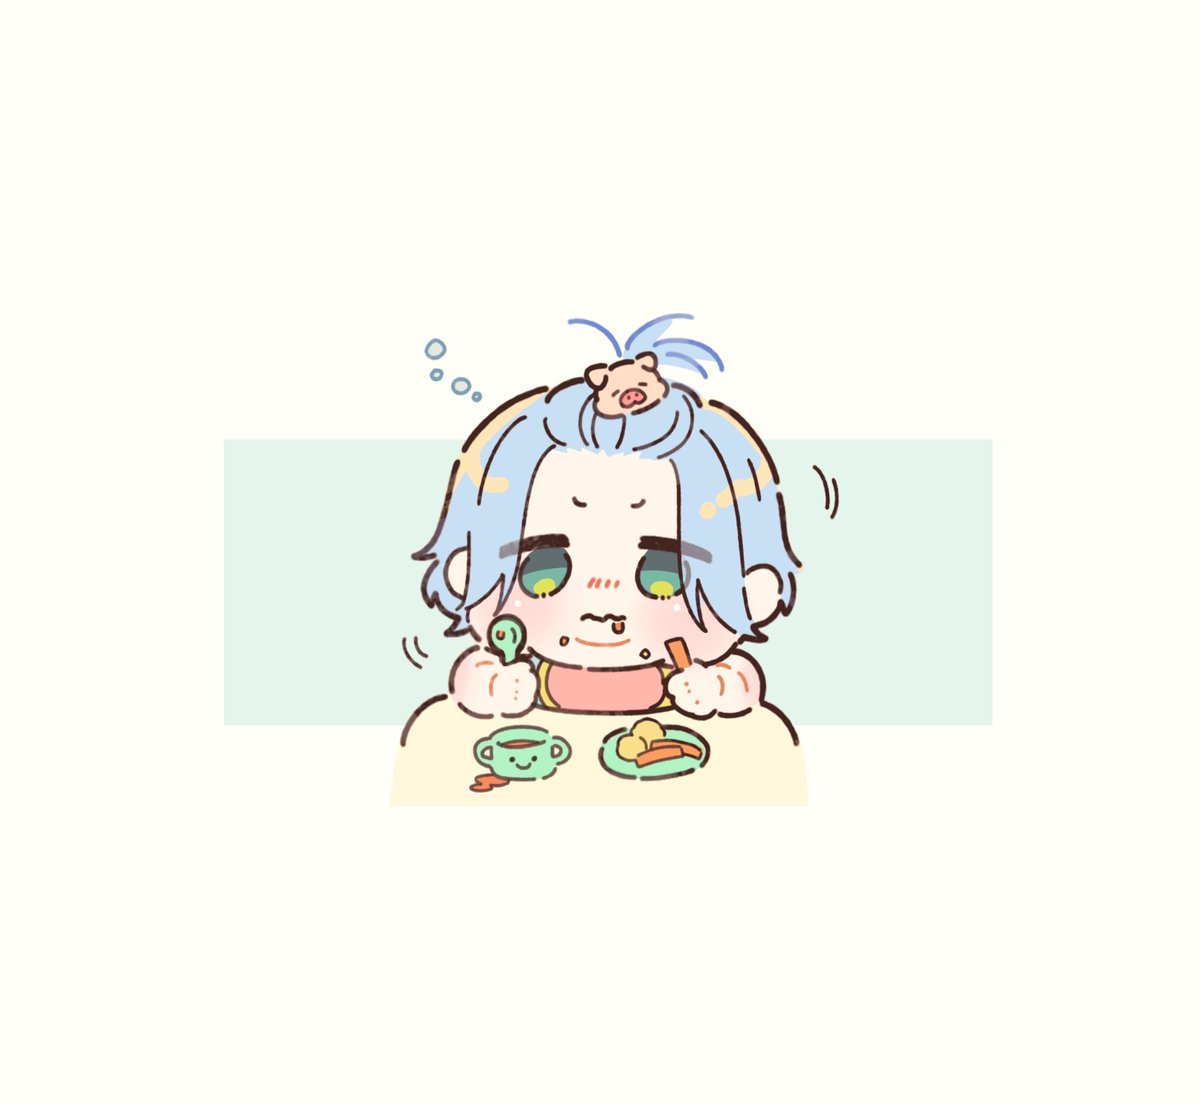 bangs pinned back blue hair solo food on face bib closed eyes short hair  illustration images